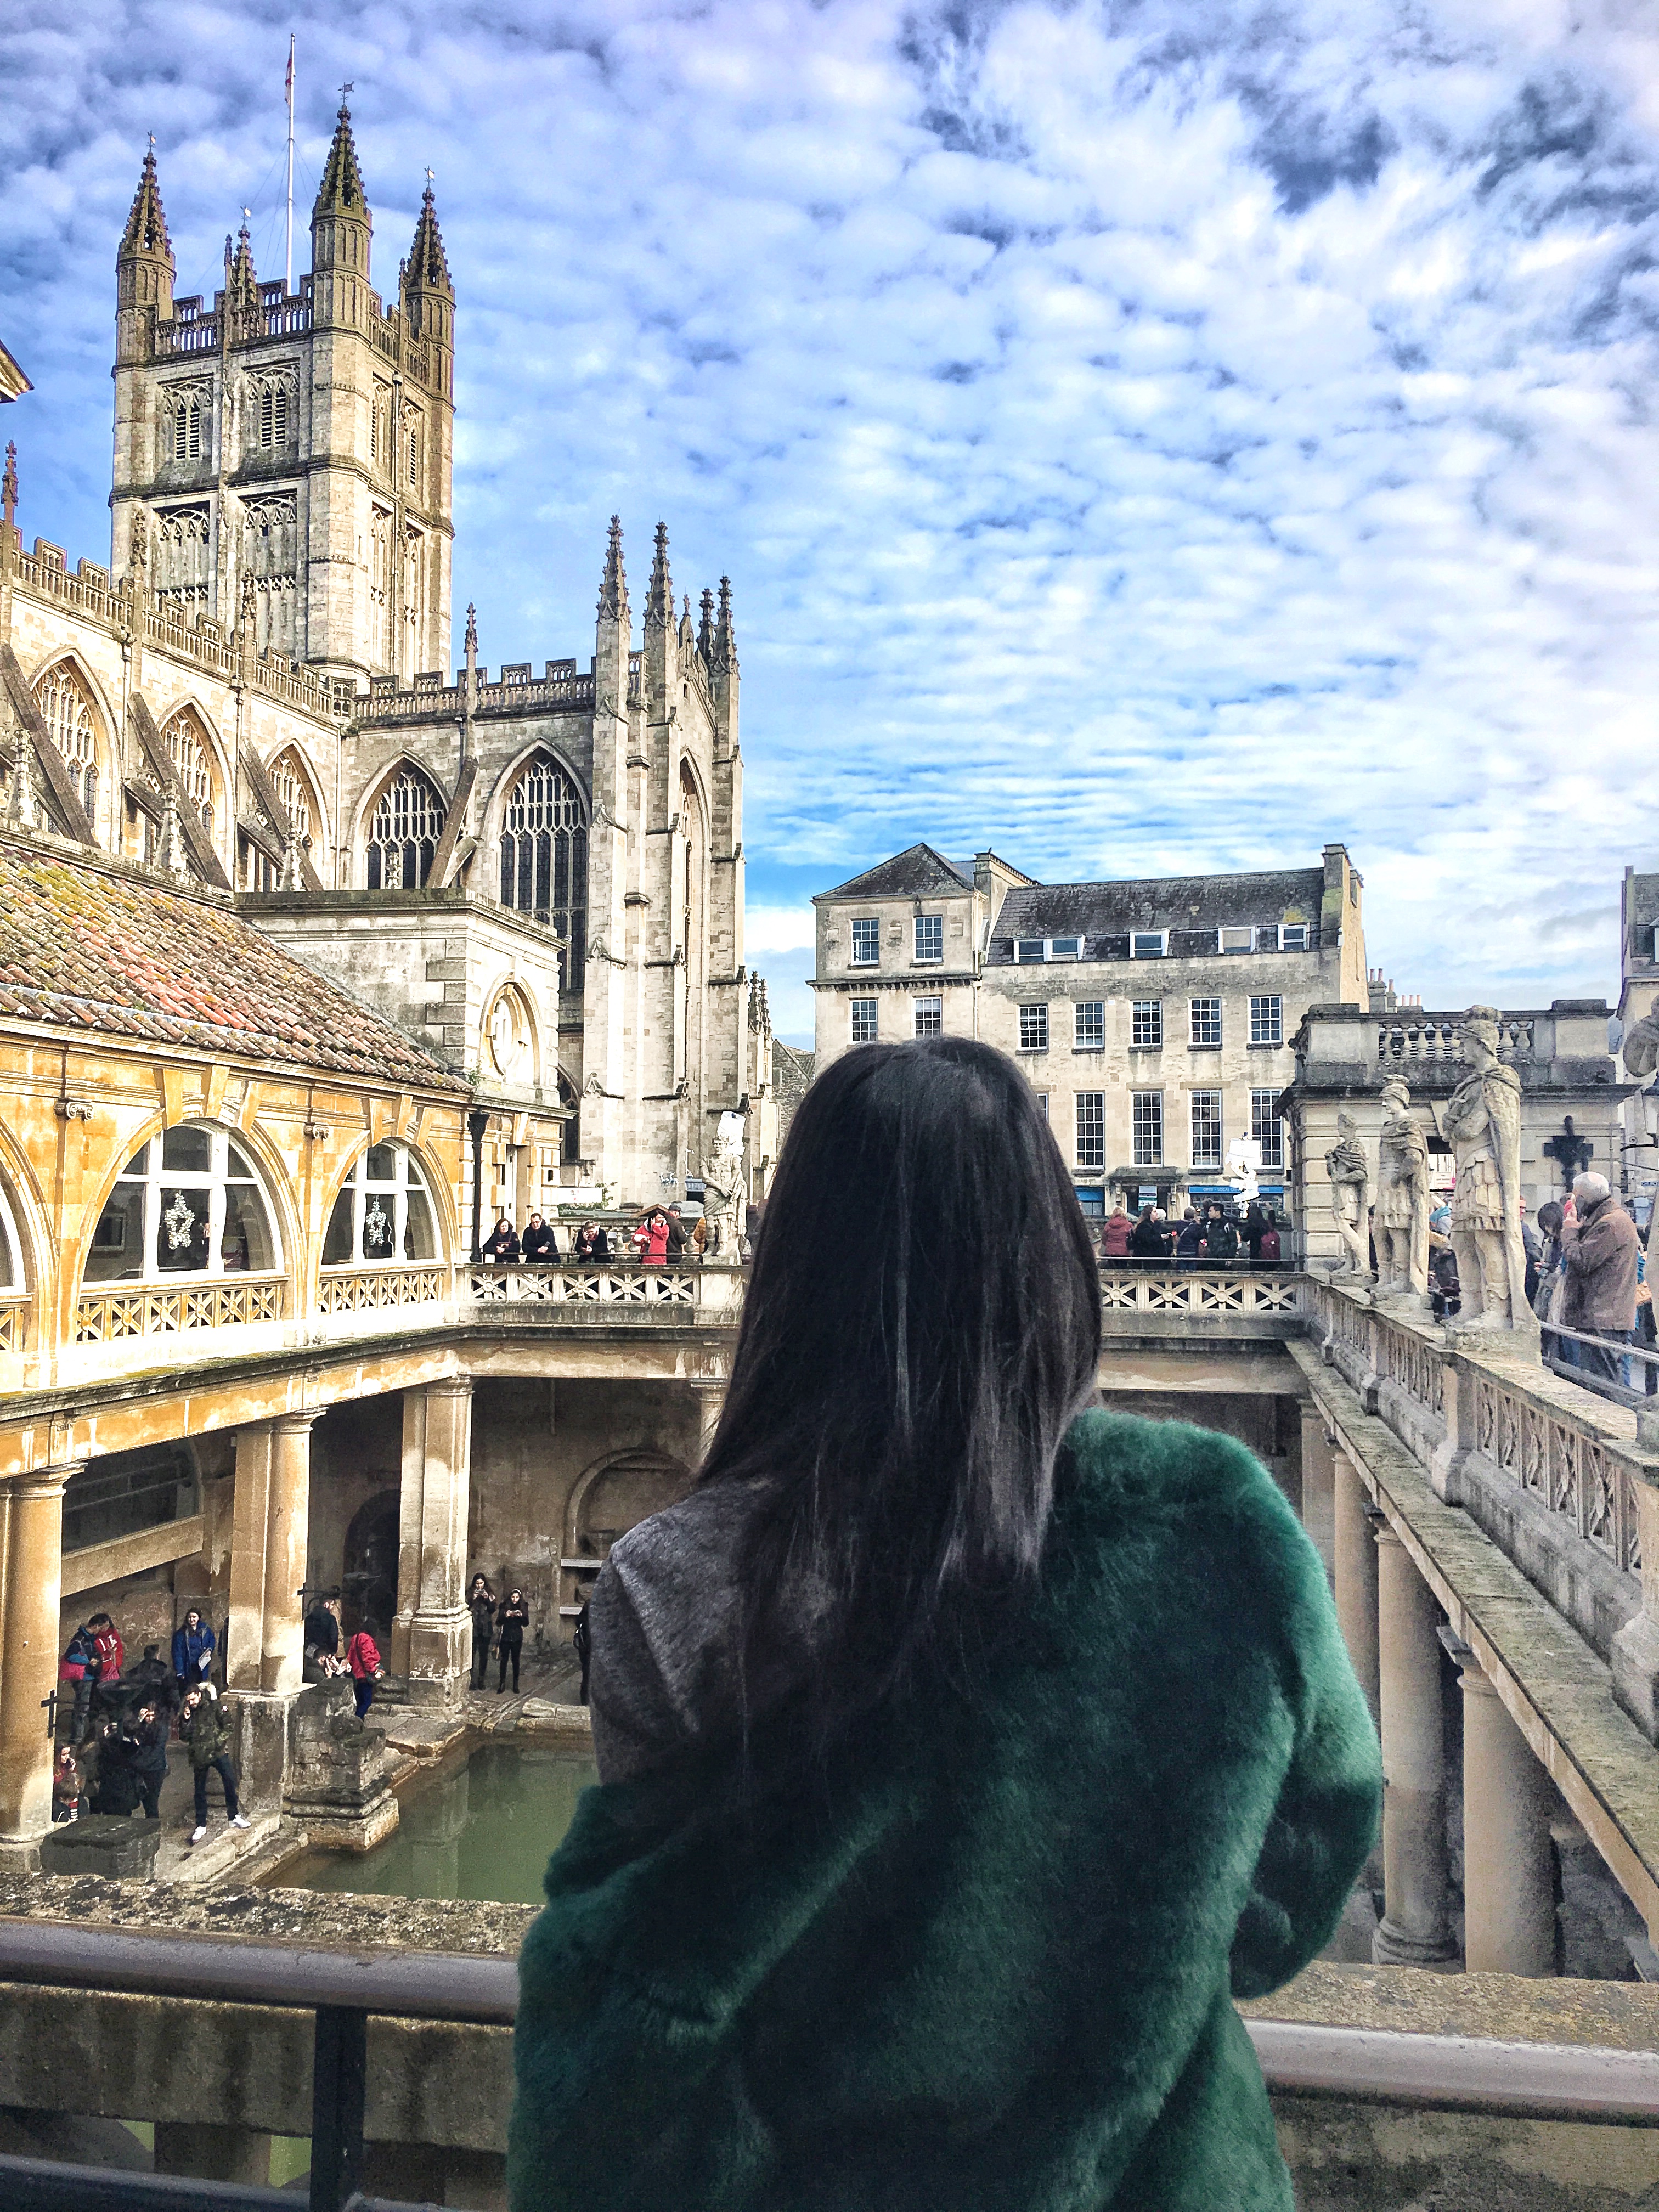 Is Bath the Most Beautiful City in England?